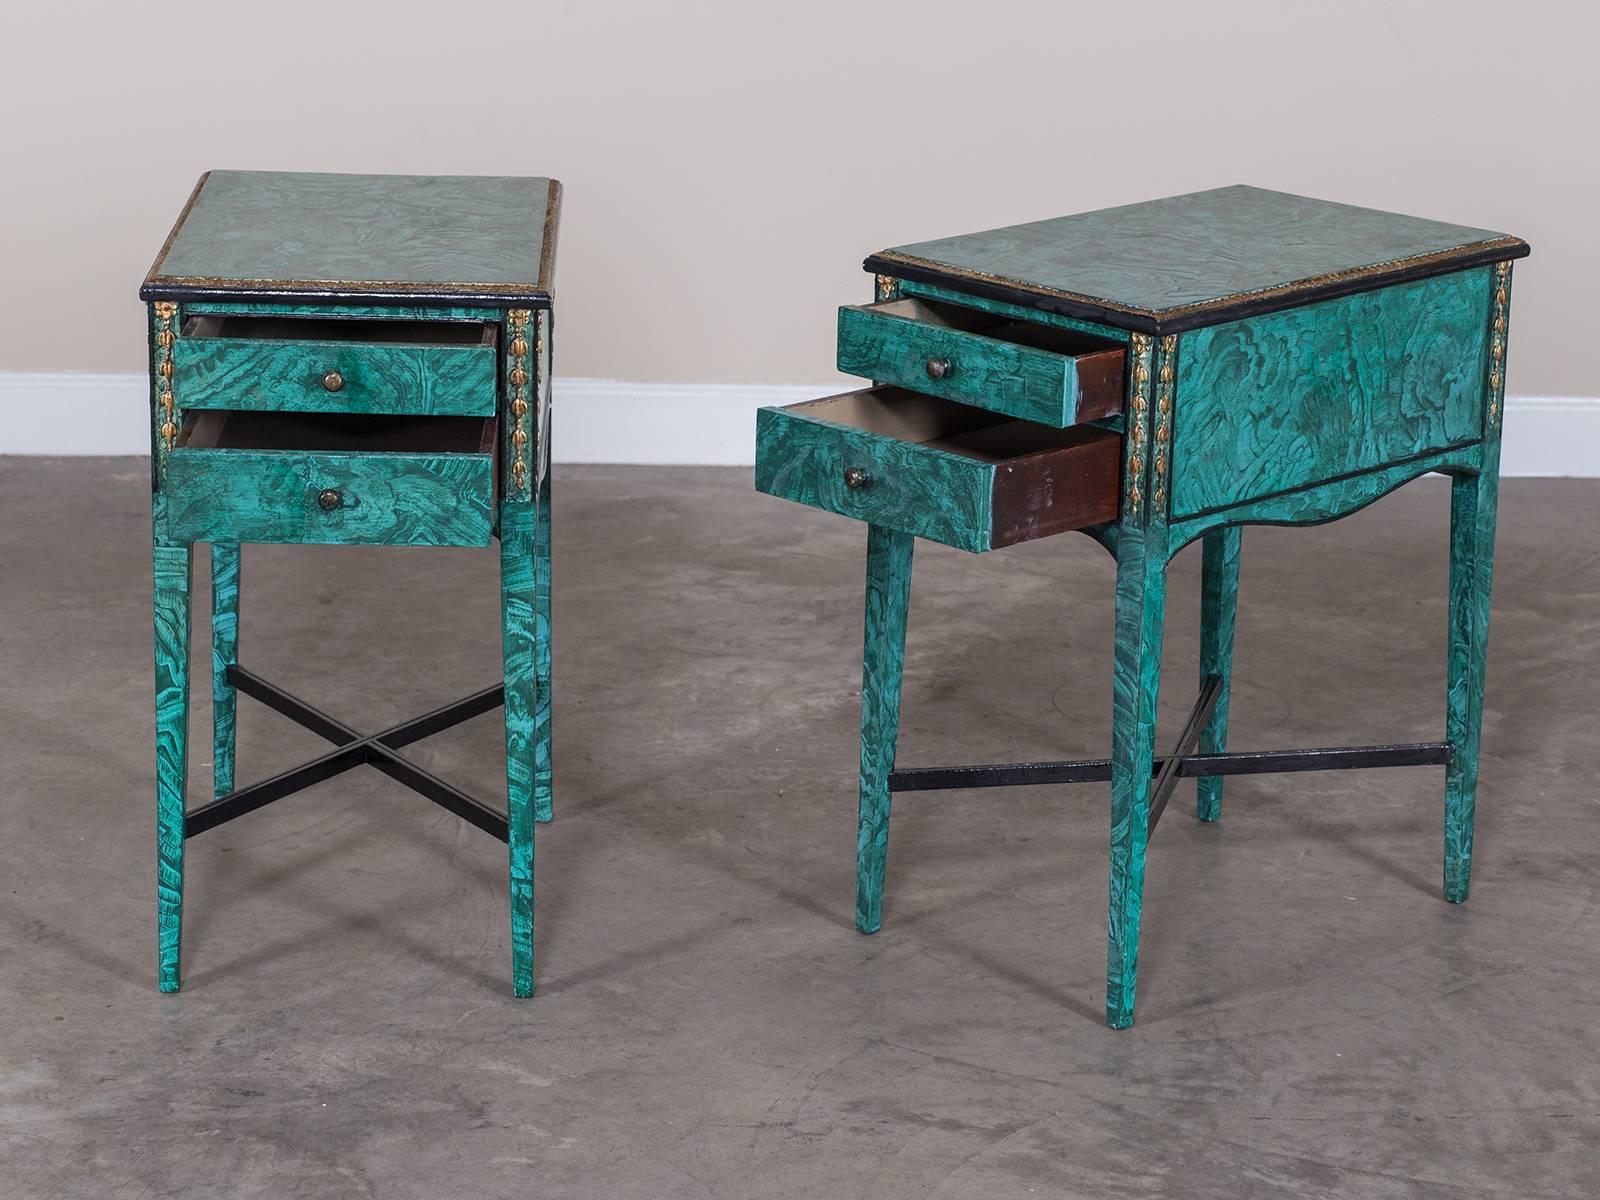 Hollywood Regency Pair of Vintage English Painted Side Tables, Gilt Accents, circa 1940